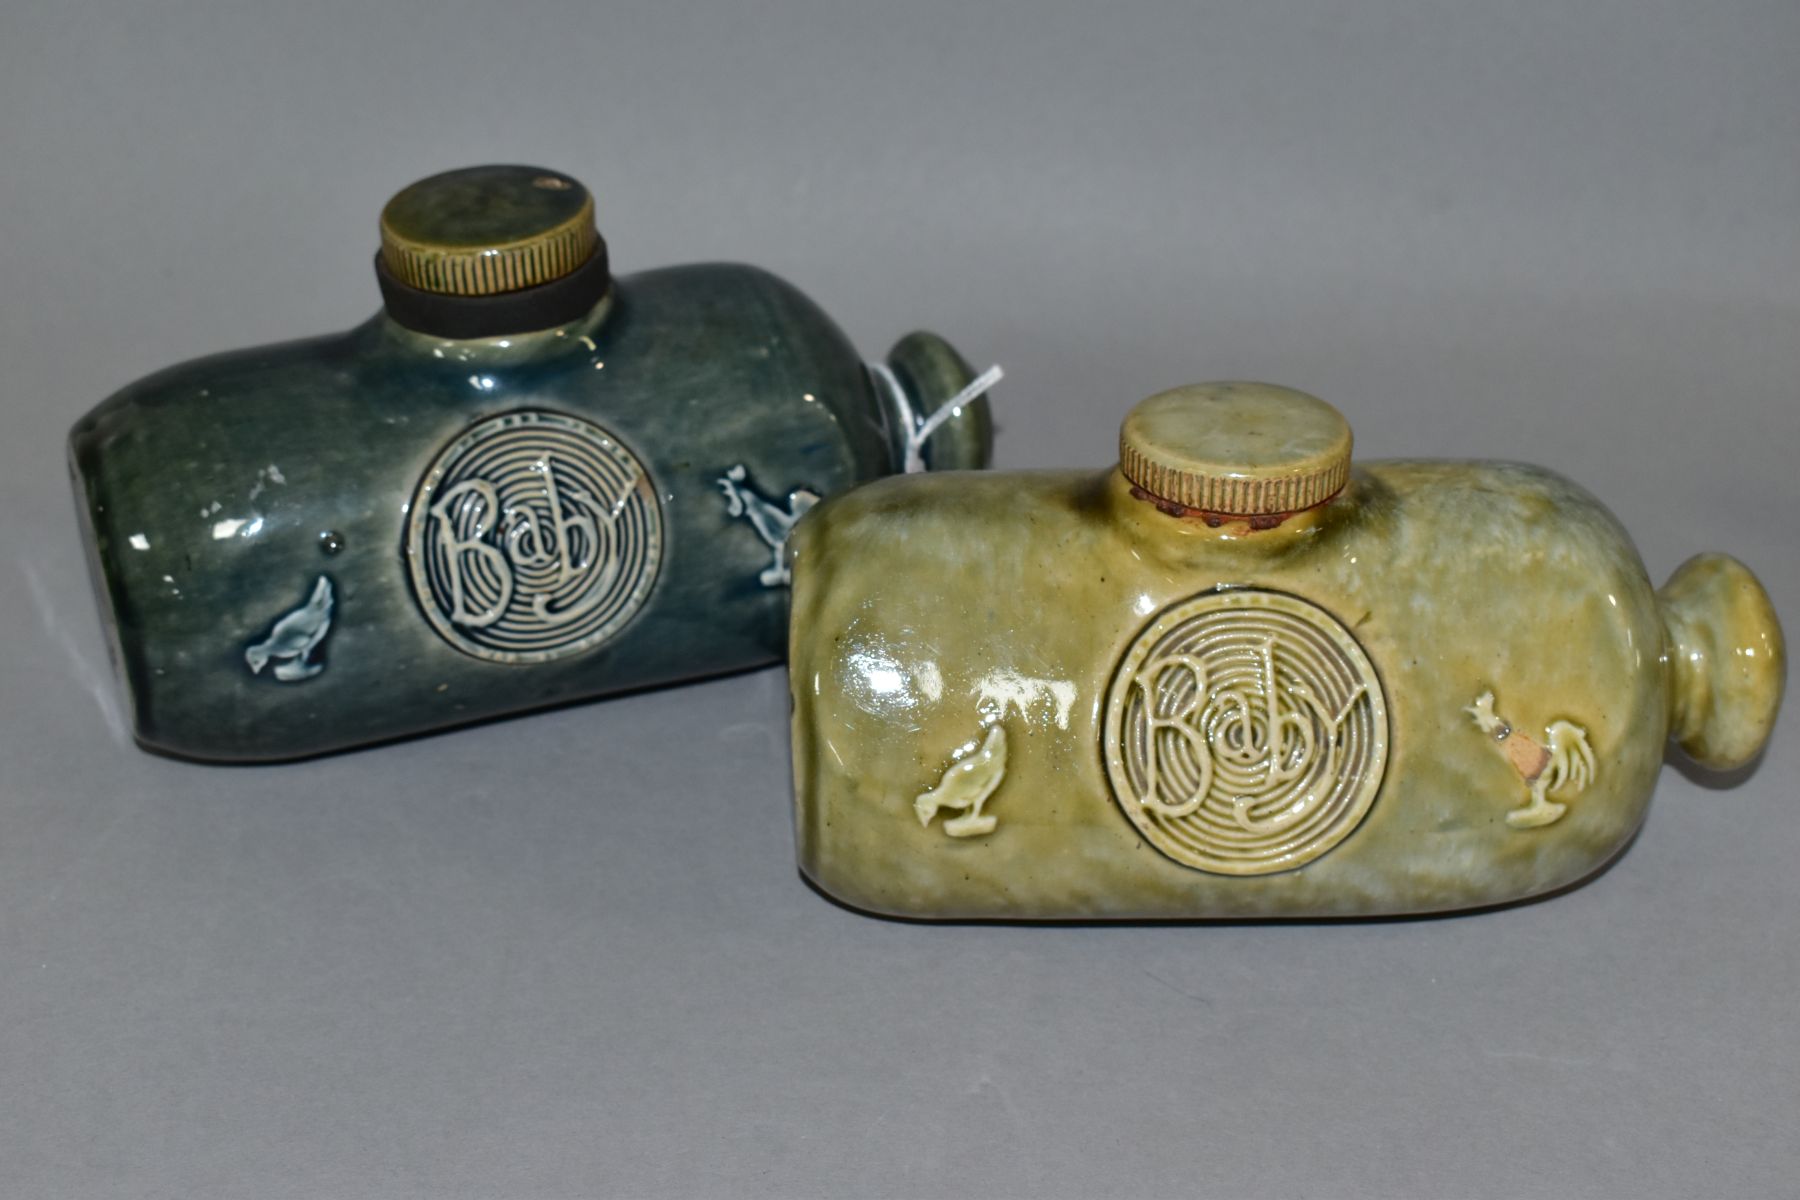 TWO ROYAL DOULTON STONEWARE 'BABY' HOT WATER BOTTLES, from nursery ware series, c.1910, both with